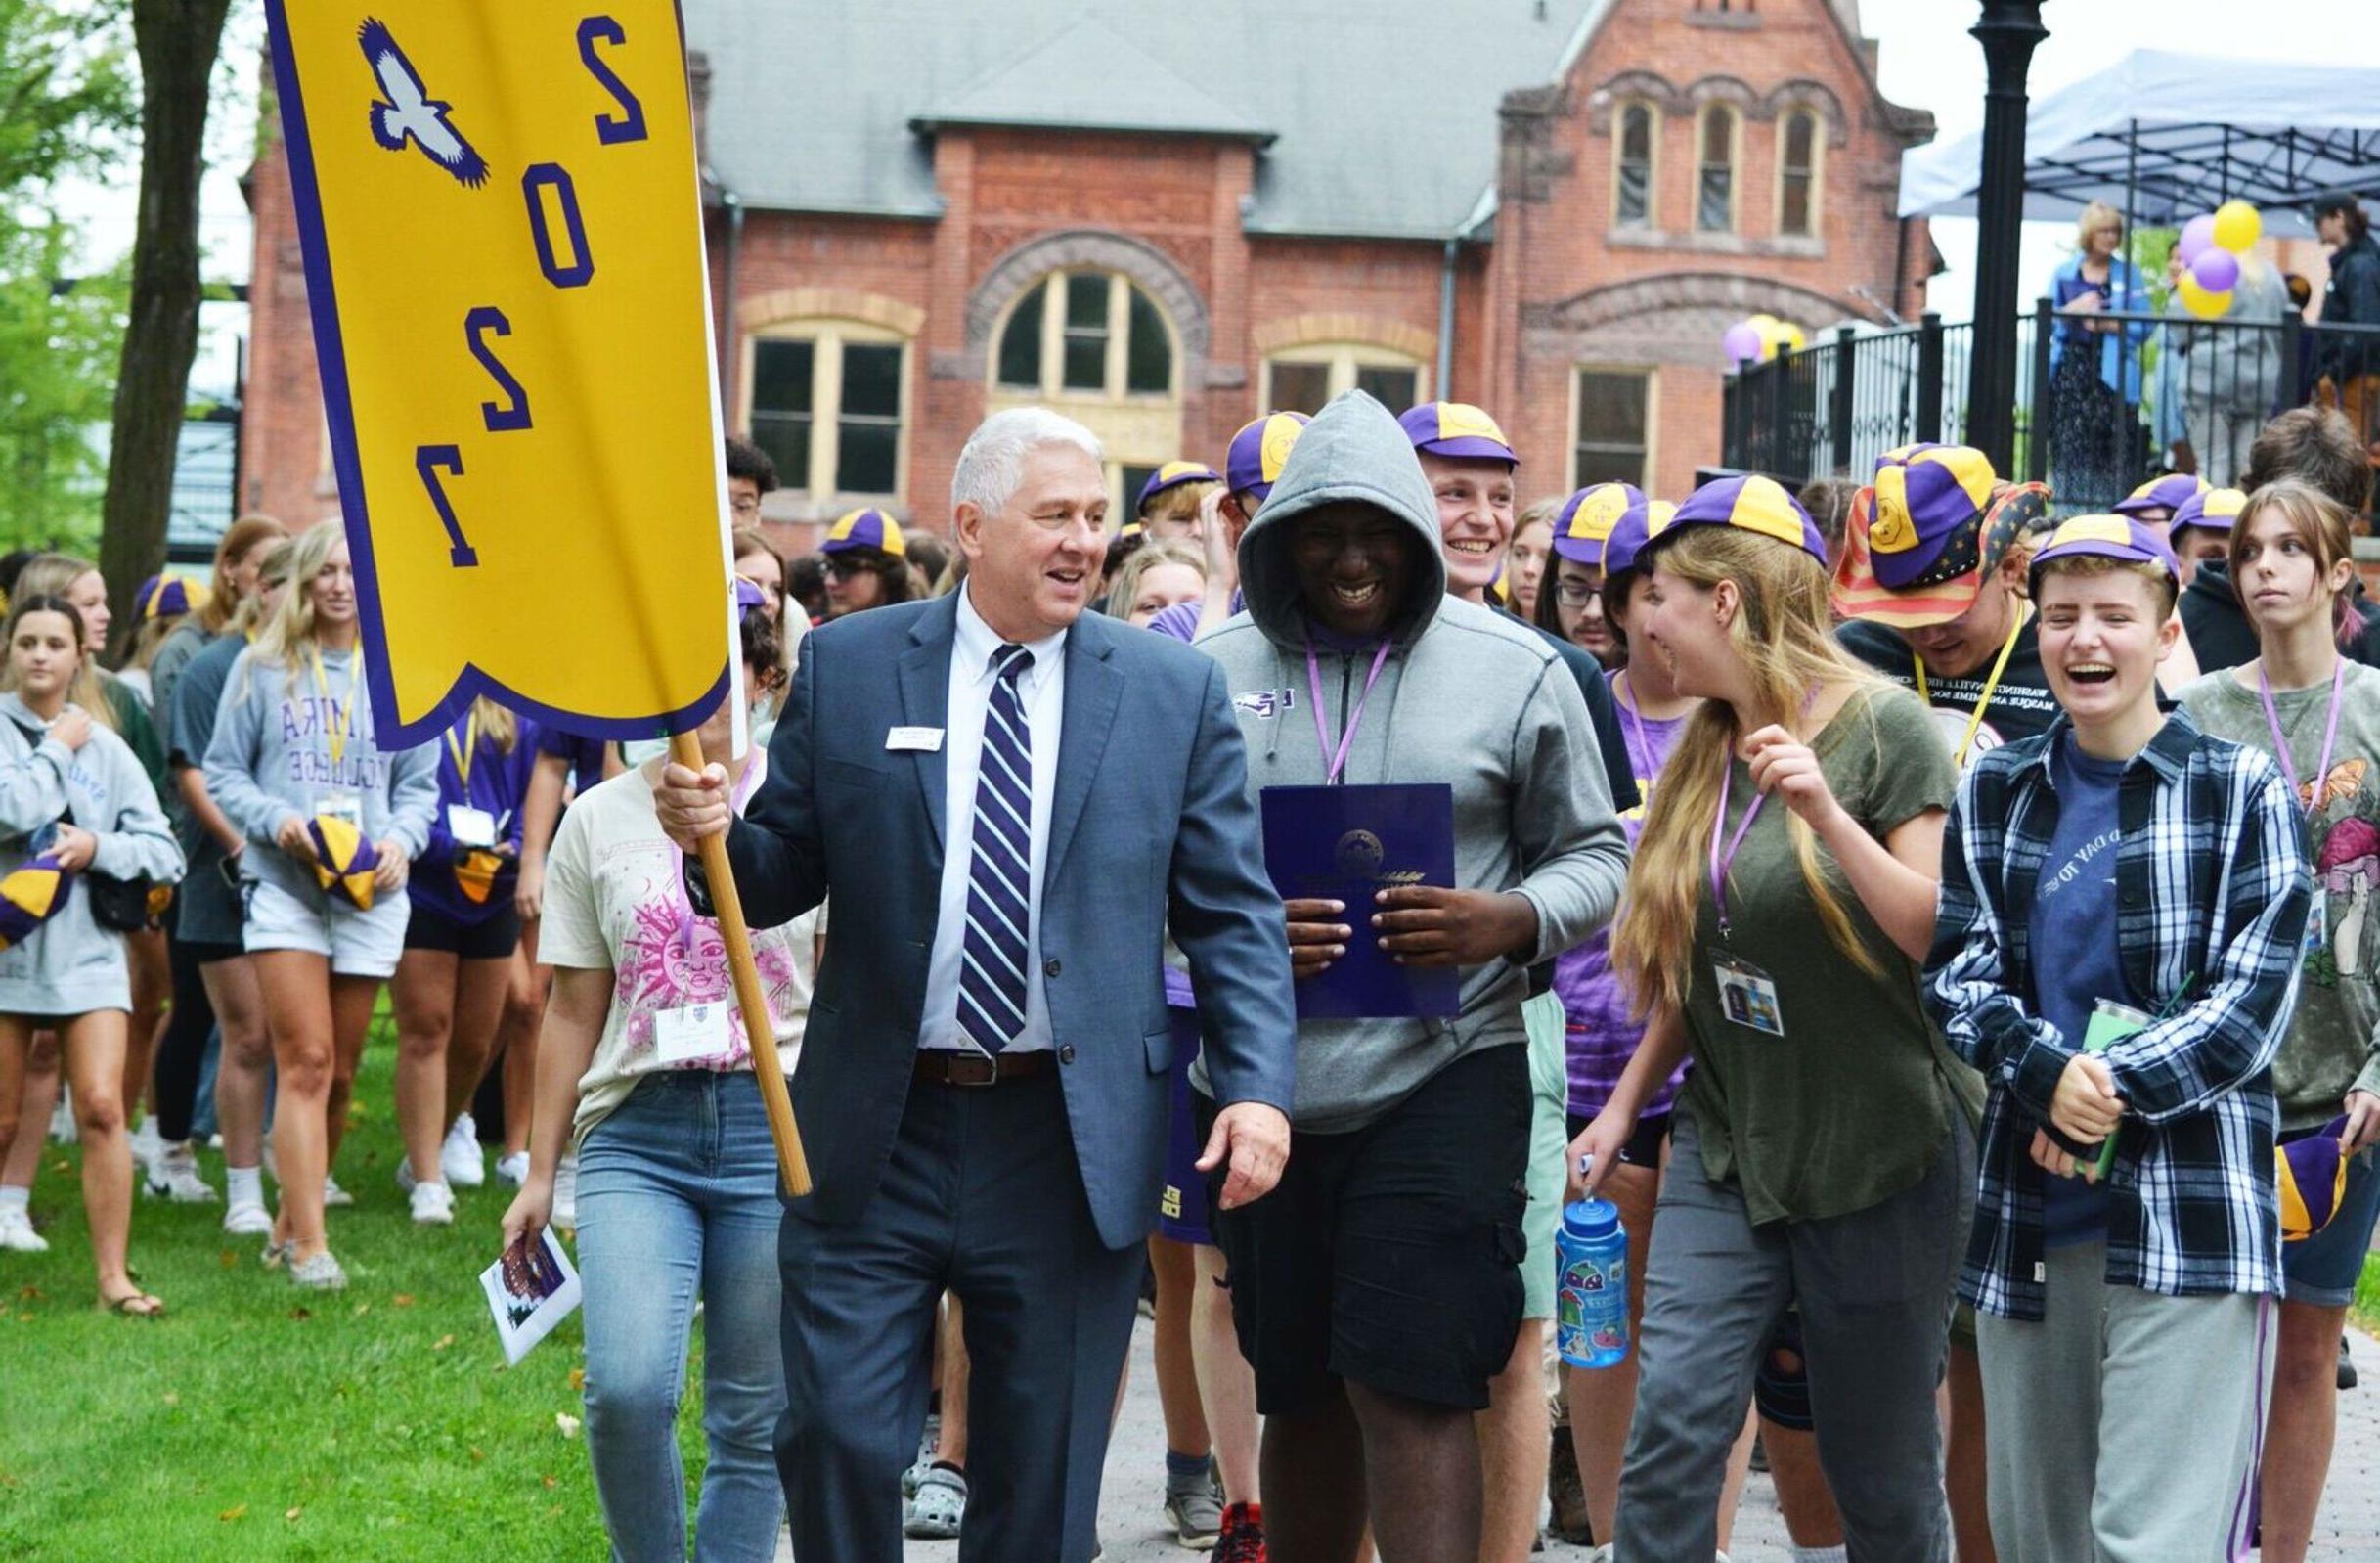 President Charles Lindsay holds a 2027 flag as he leads a procession of new students following the fall welcome.